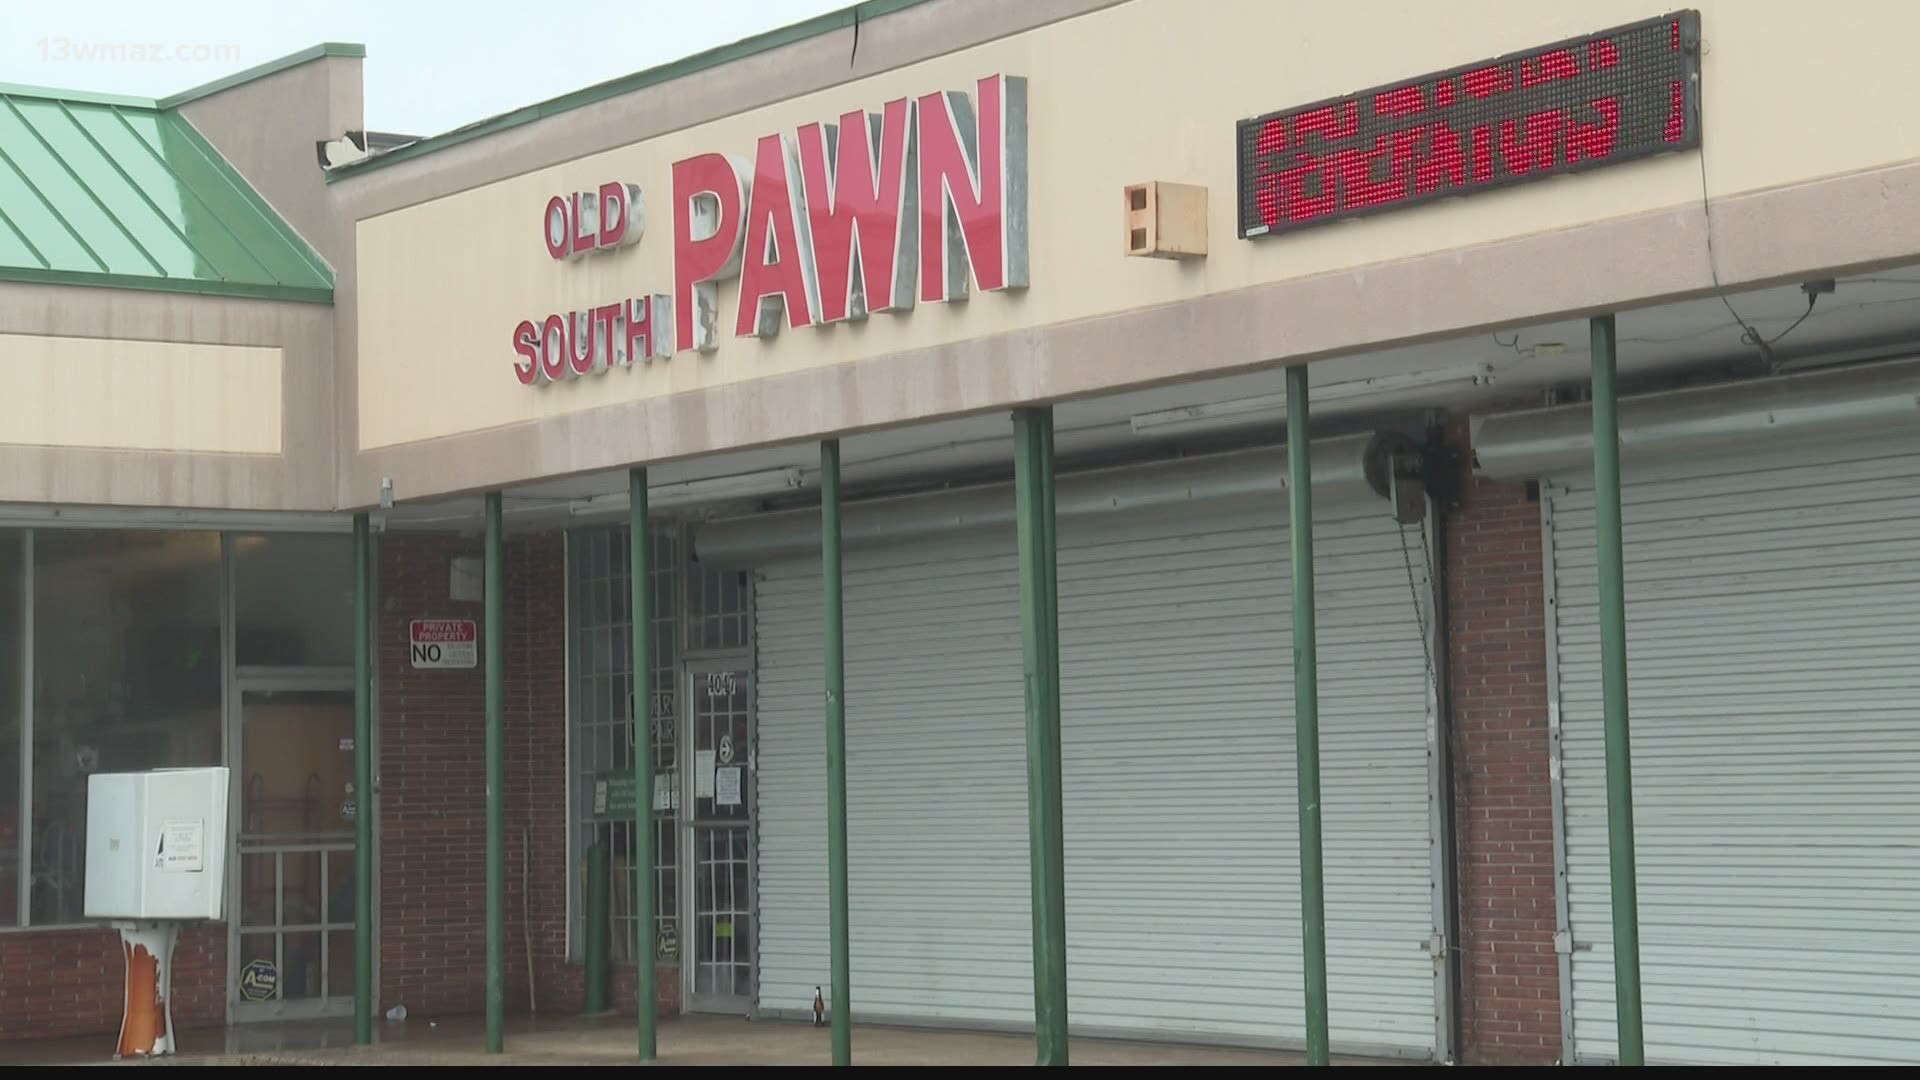 The moratorium on pawn shops is for up to 6 months while the ban on new liquor stores is indefinite.